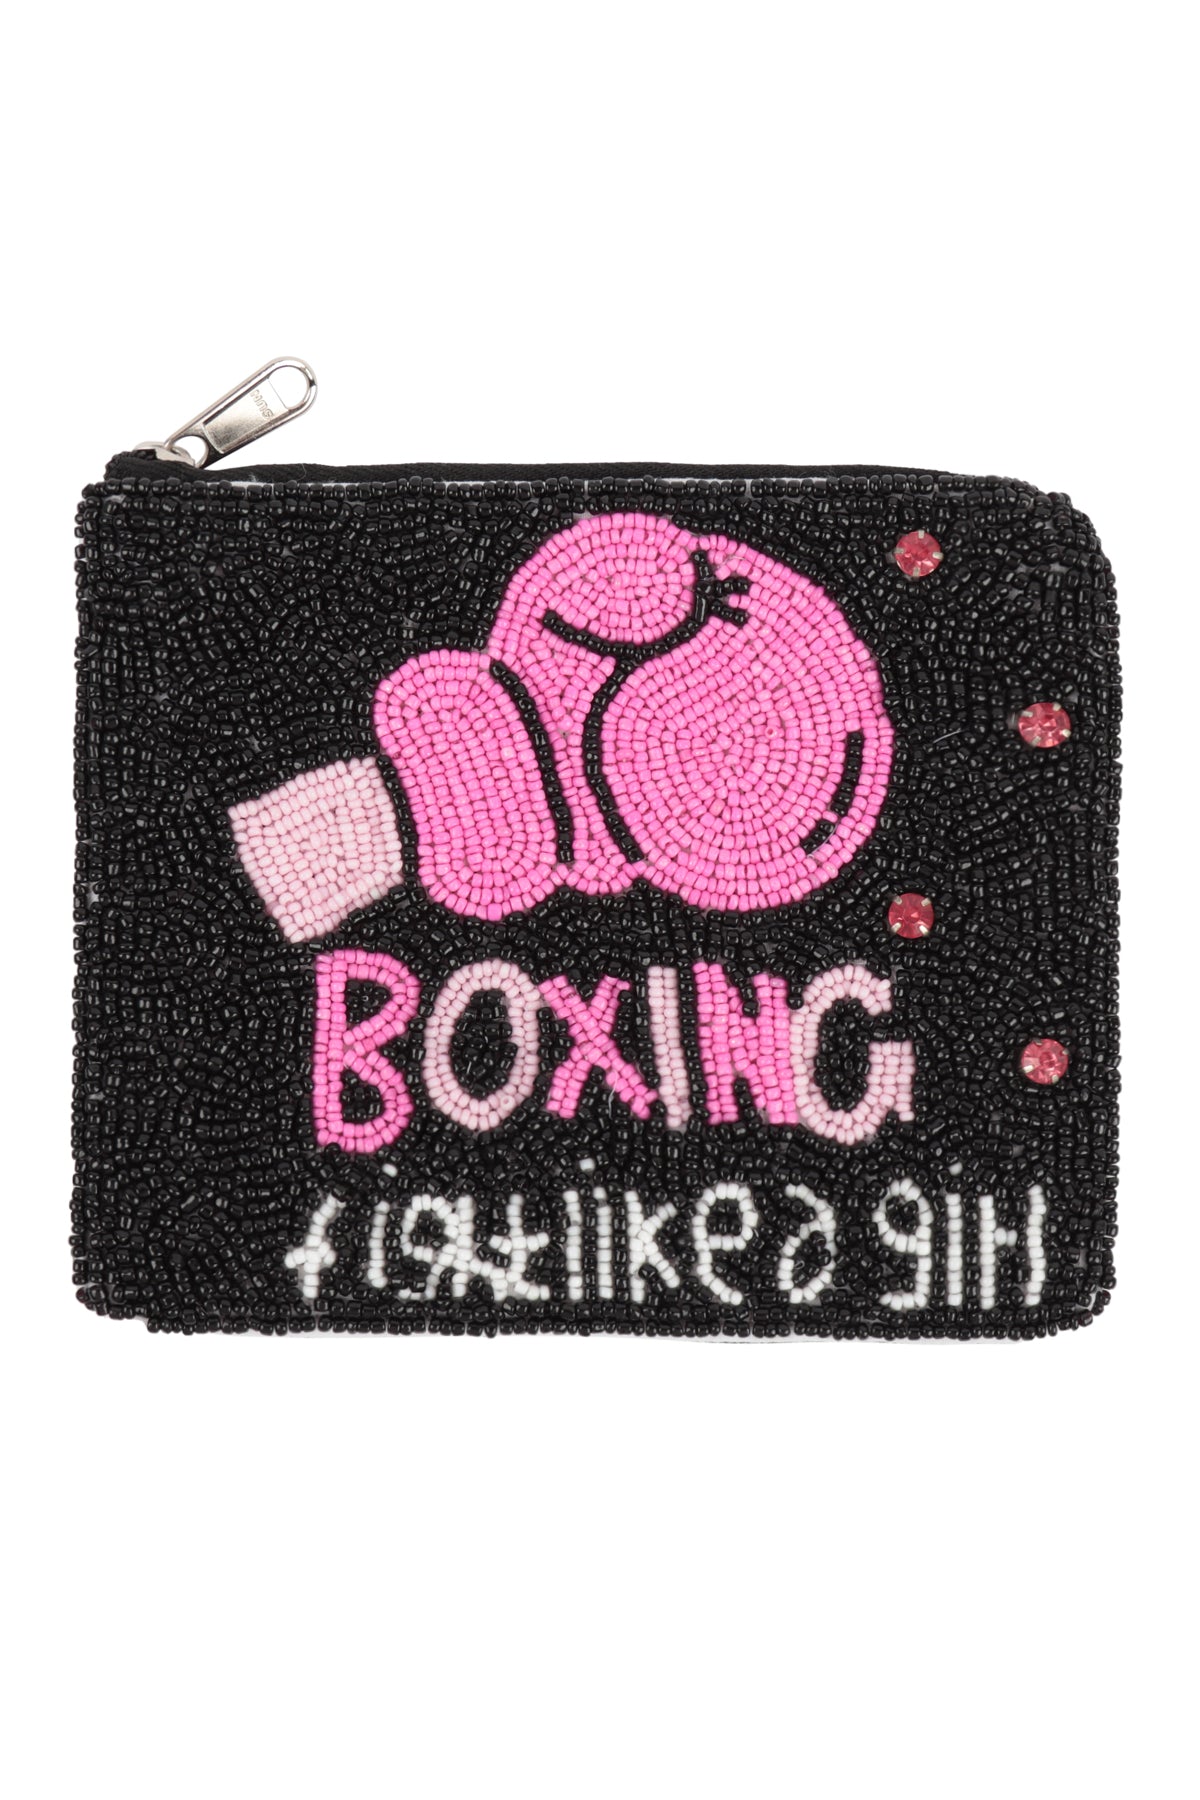 BOXING FIGHT LIKE A GIRL SEED BEADS COIN POUCH-BLACK